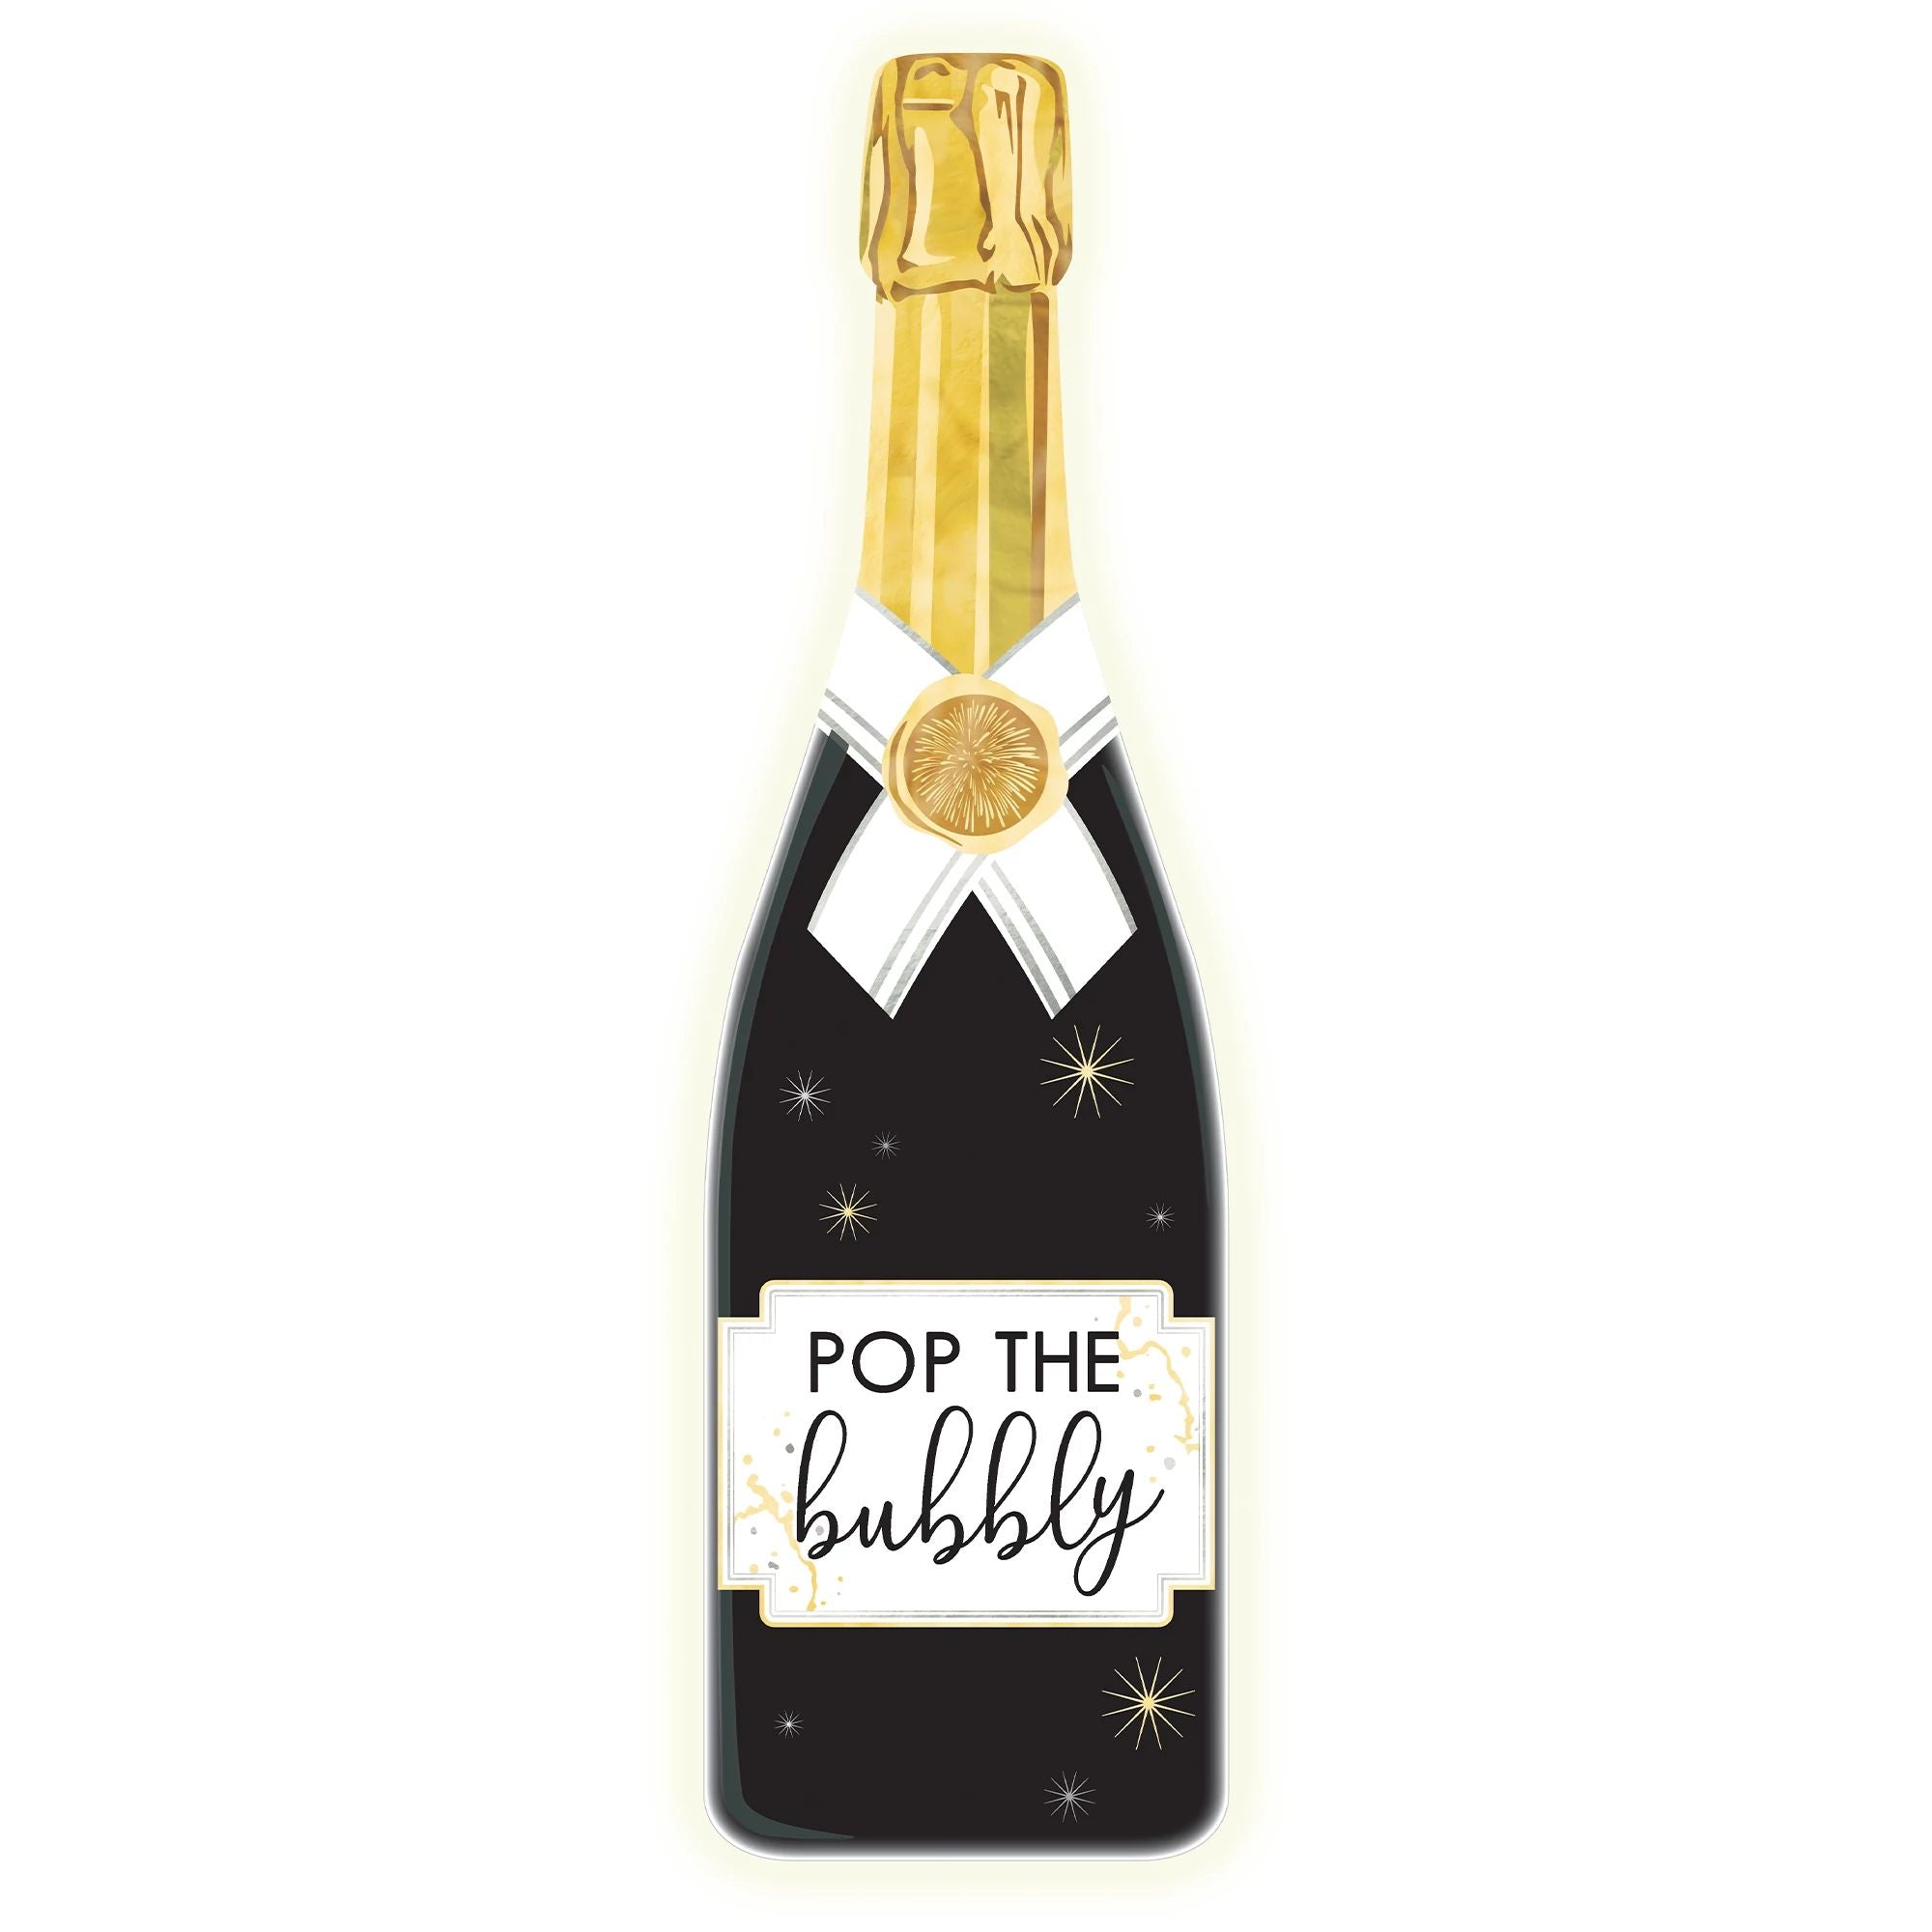 Amscan HOLIDAY: NEW YEAR'S Champagne Bottle LED Sign